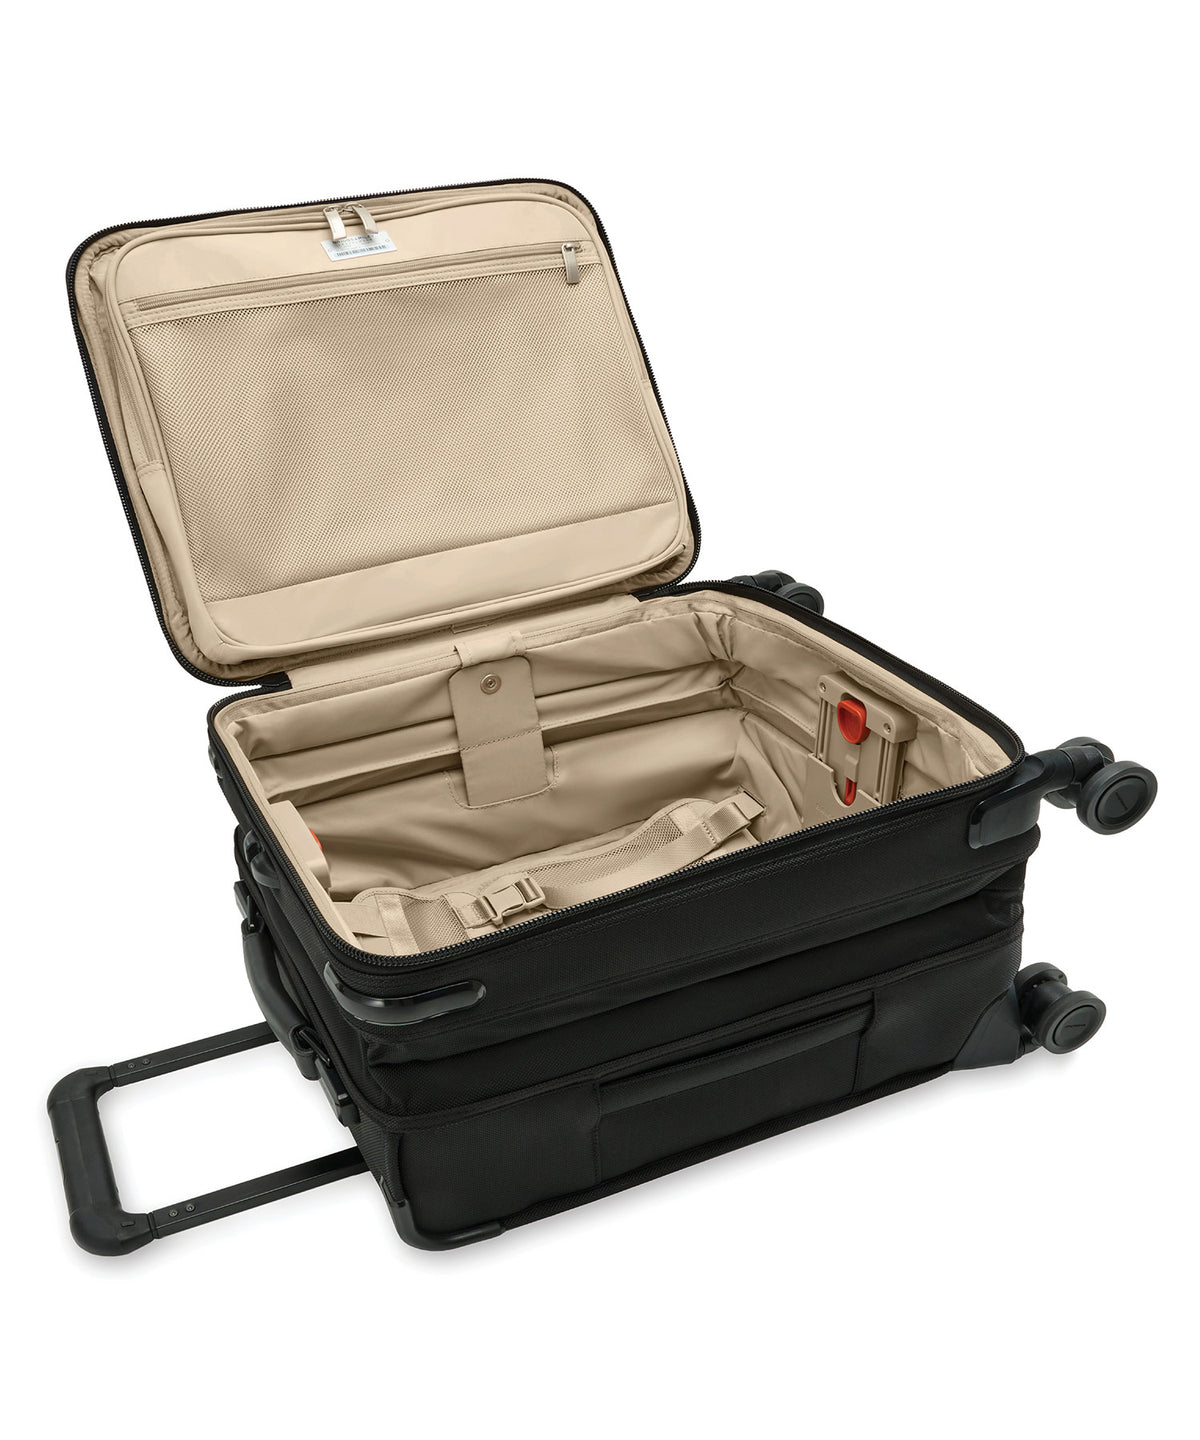 Briggs & Riley Compact 19″ Carry-On Expandable Spinner, Men's Big & Tall